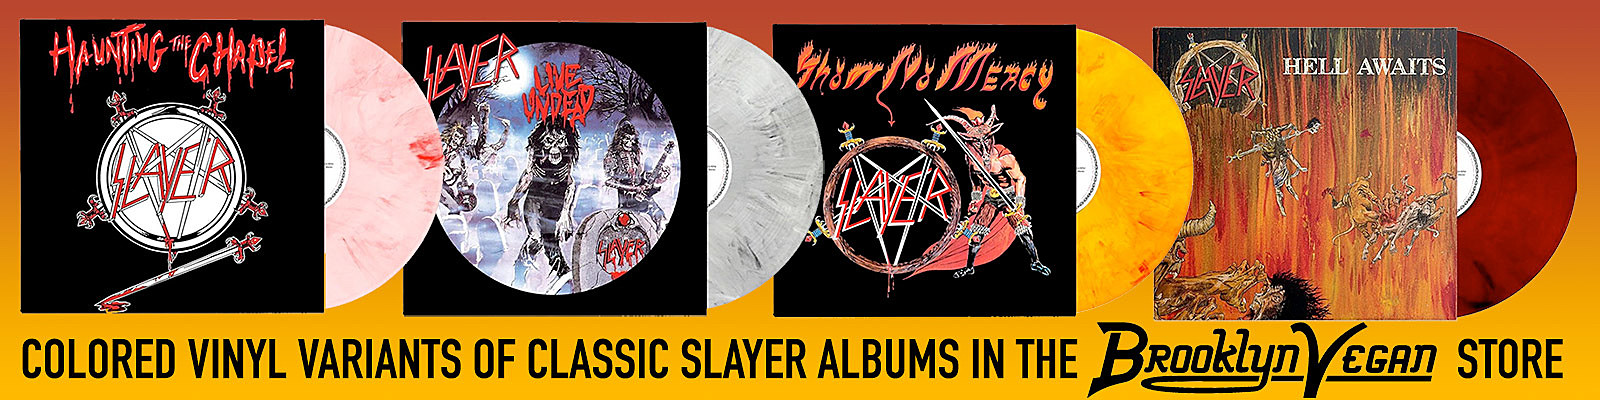 slayer discography track list